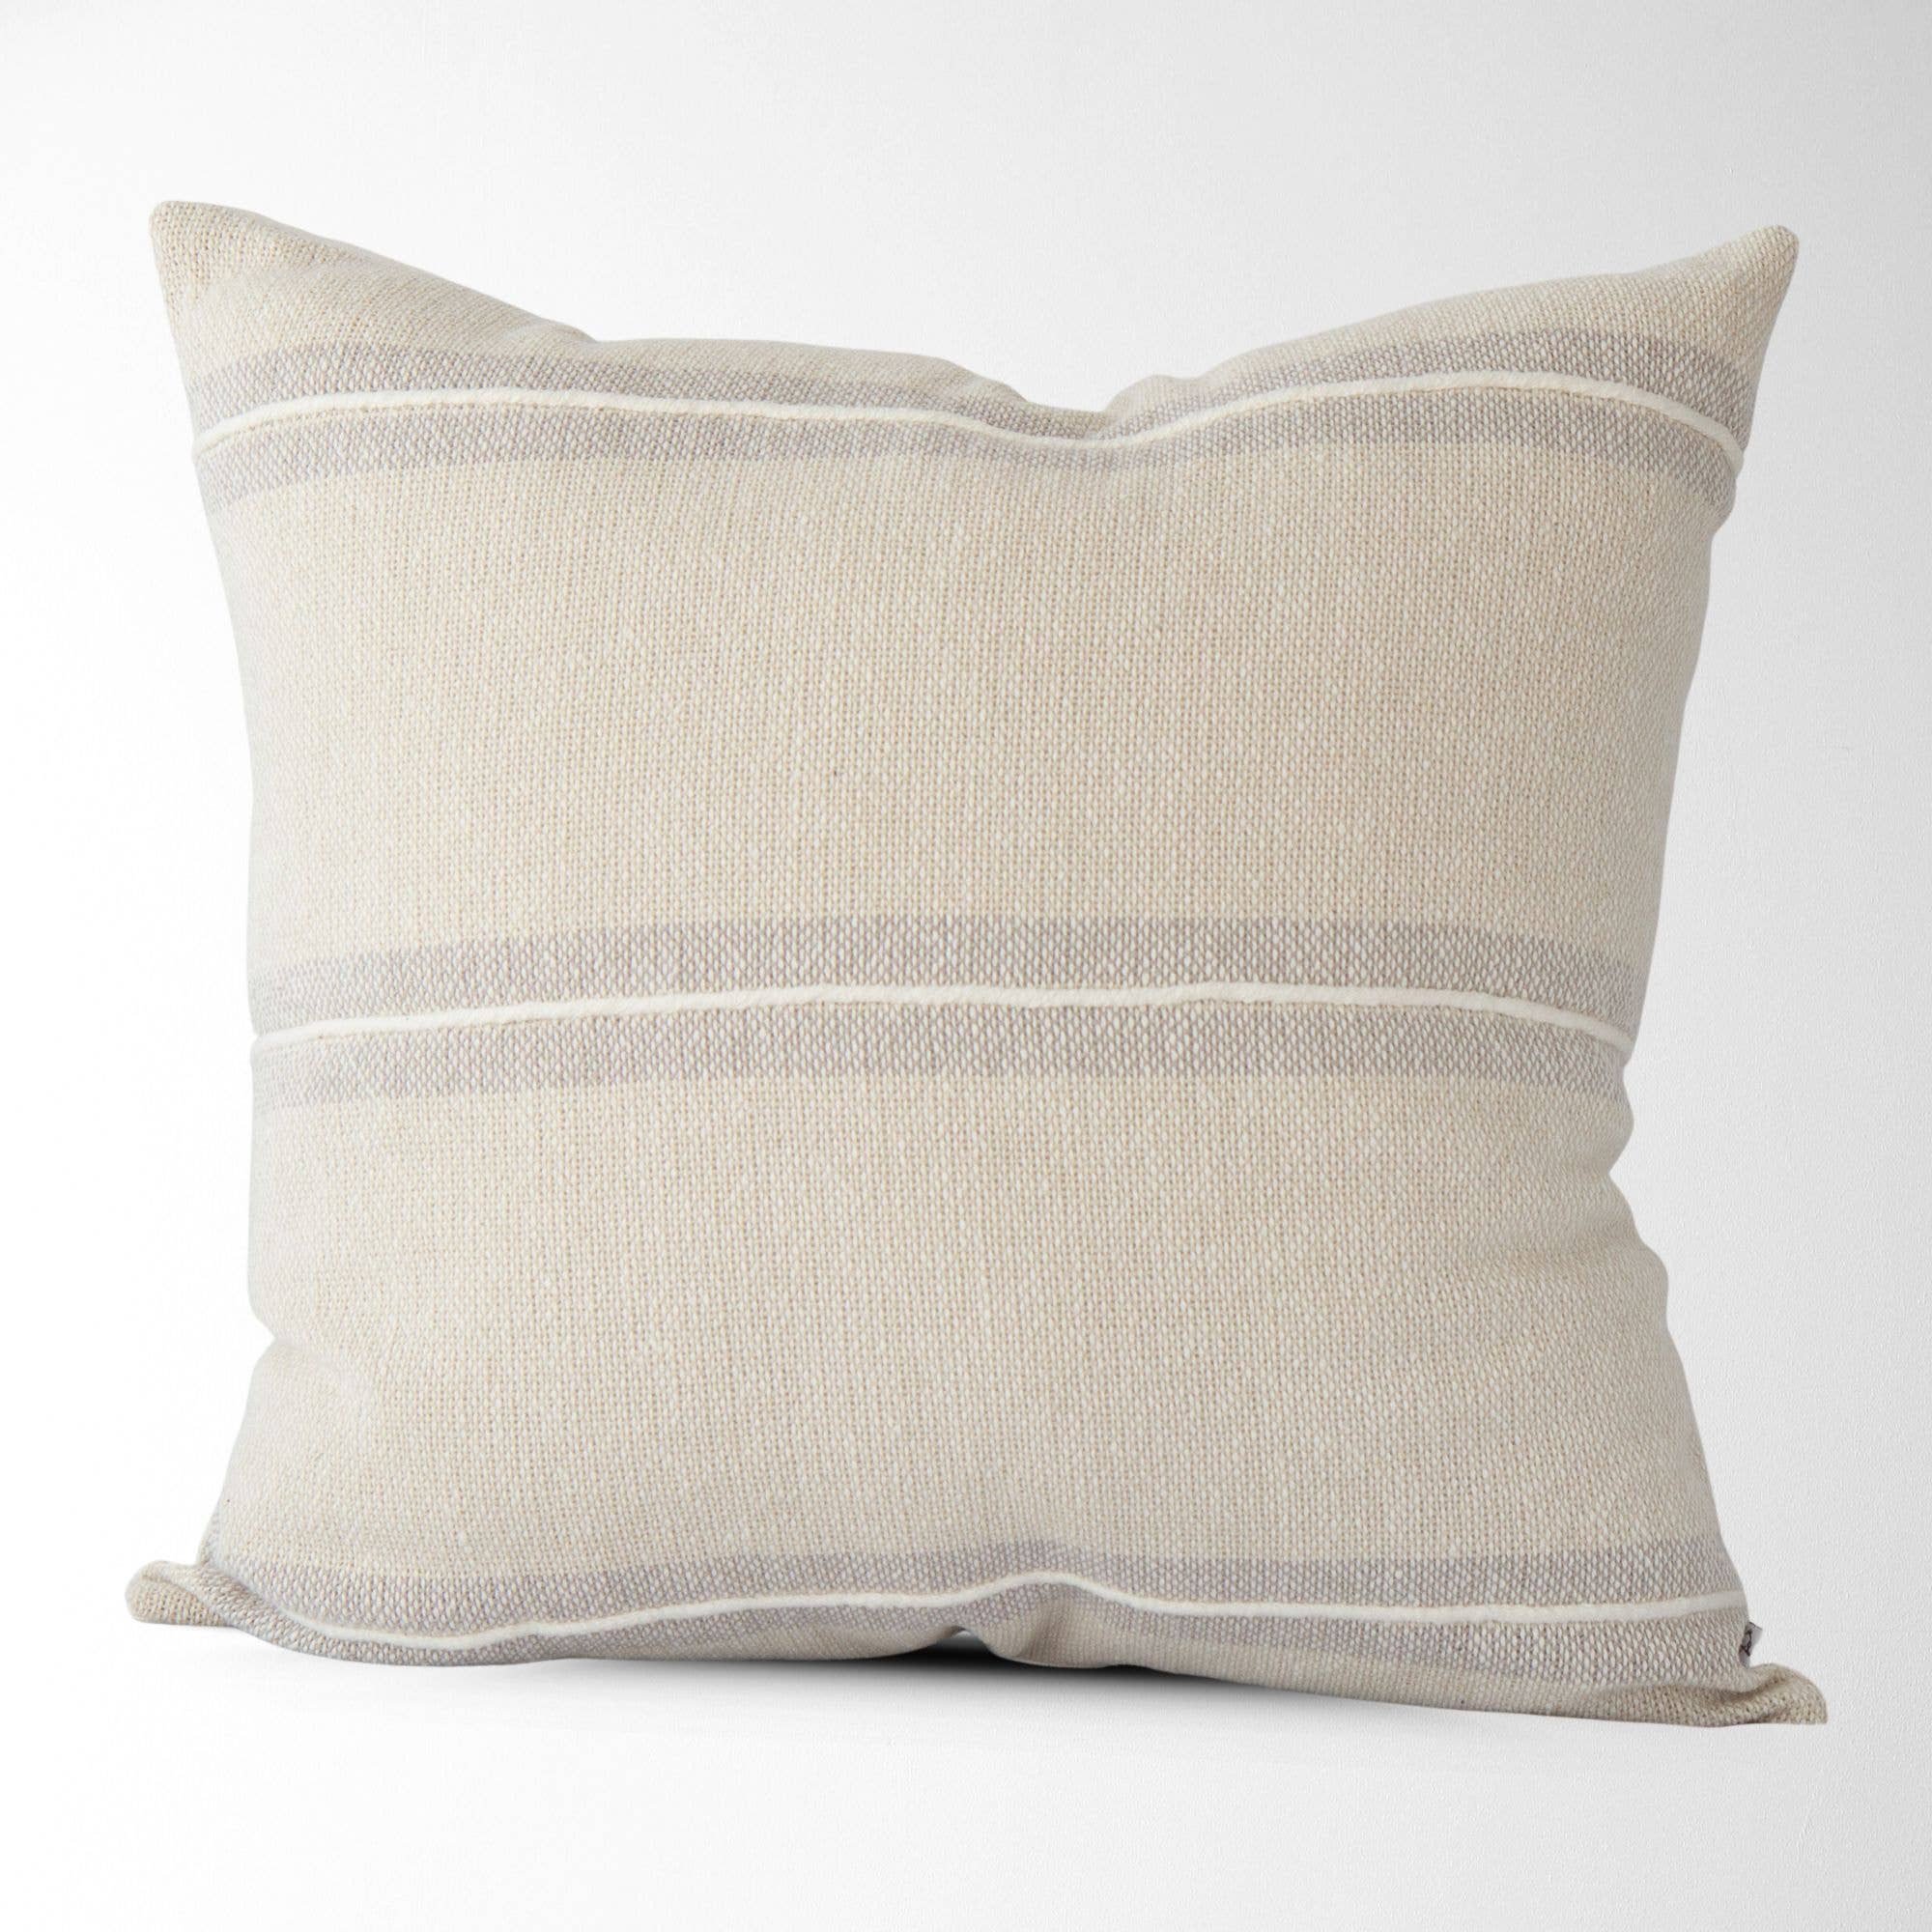 Harlow Striped Textured Pillow Cover - Oatmeal